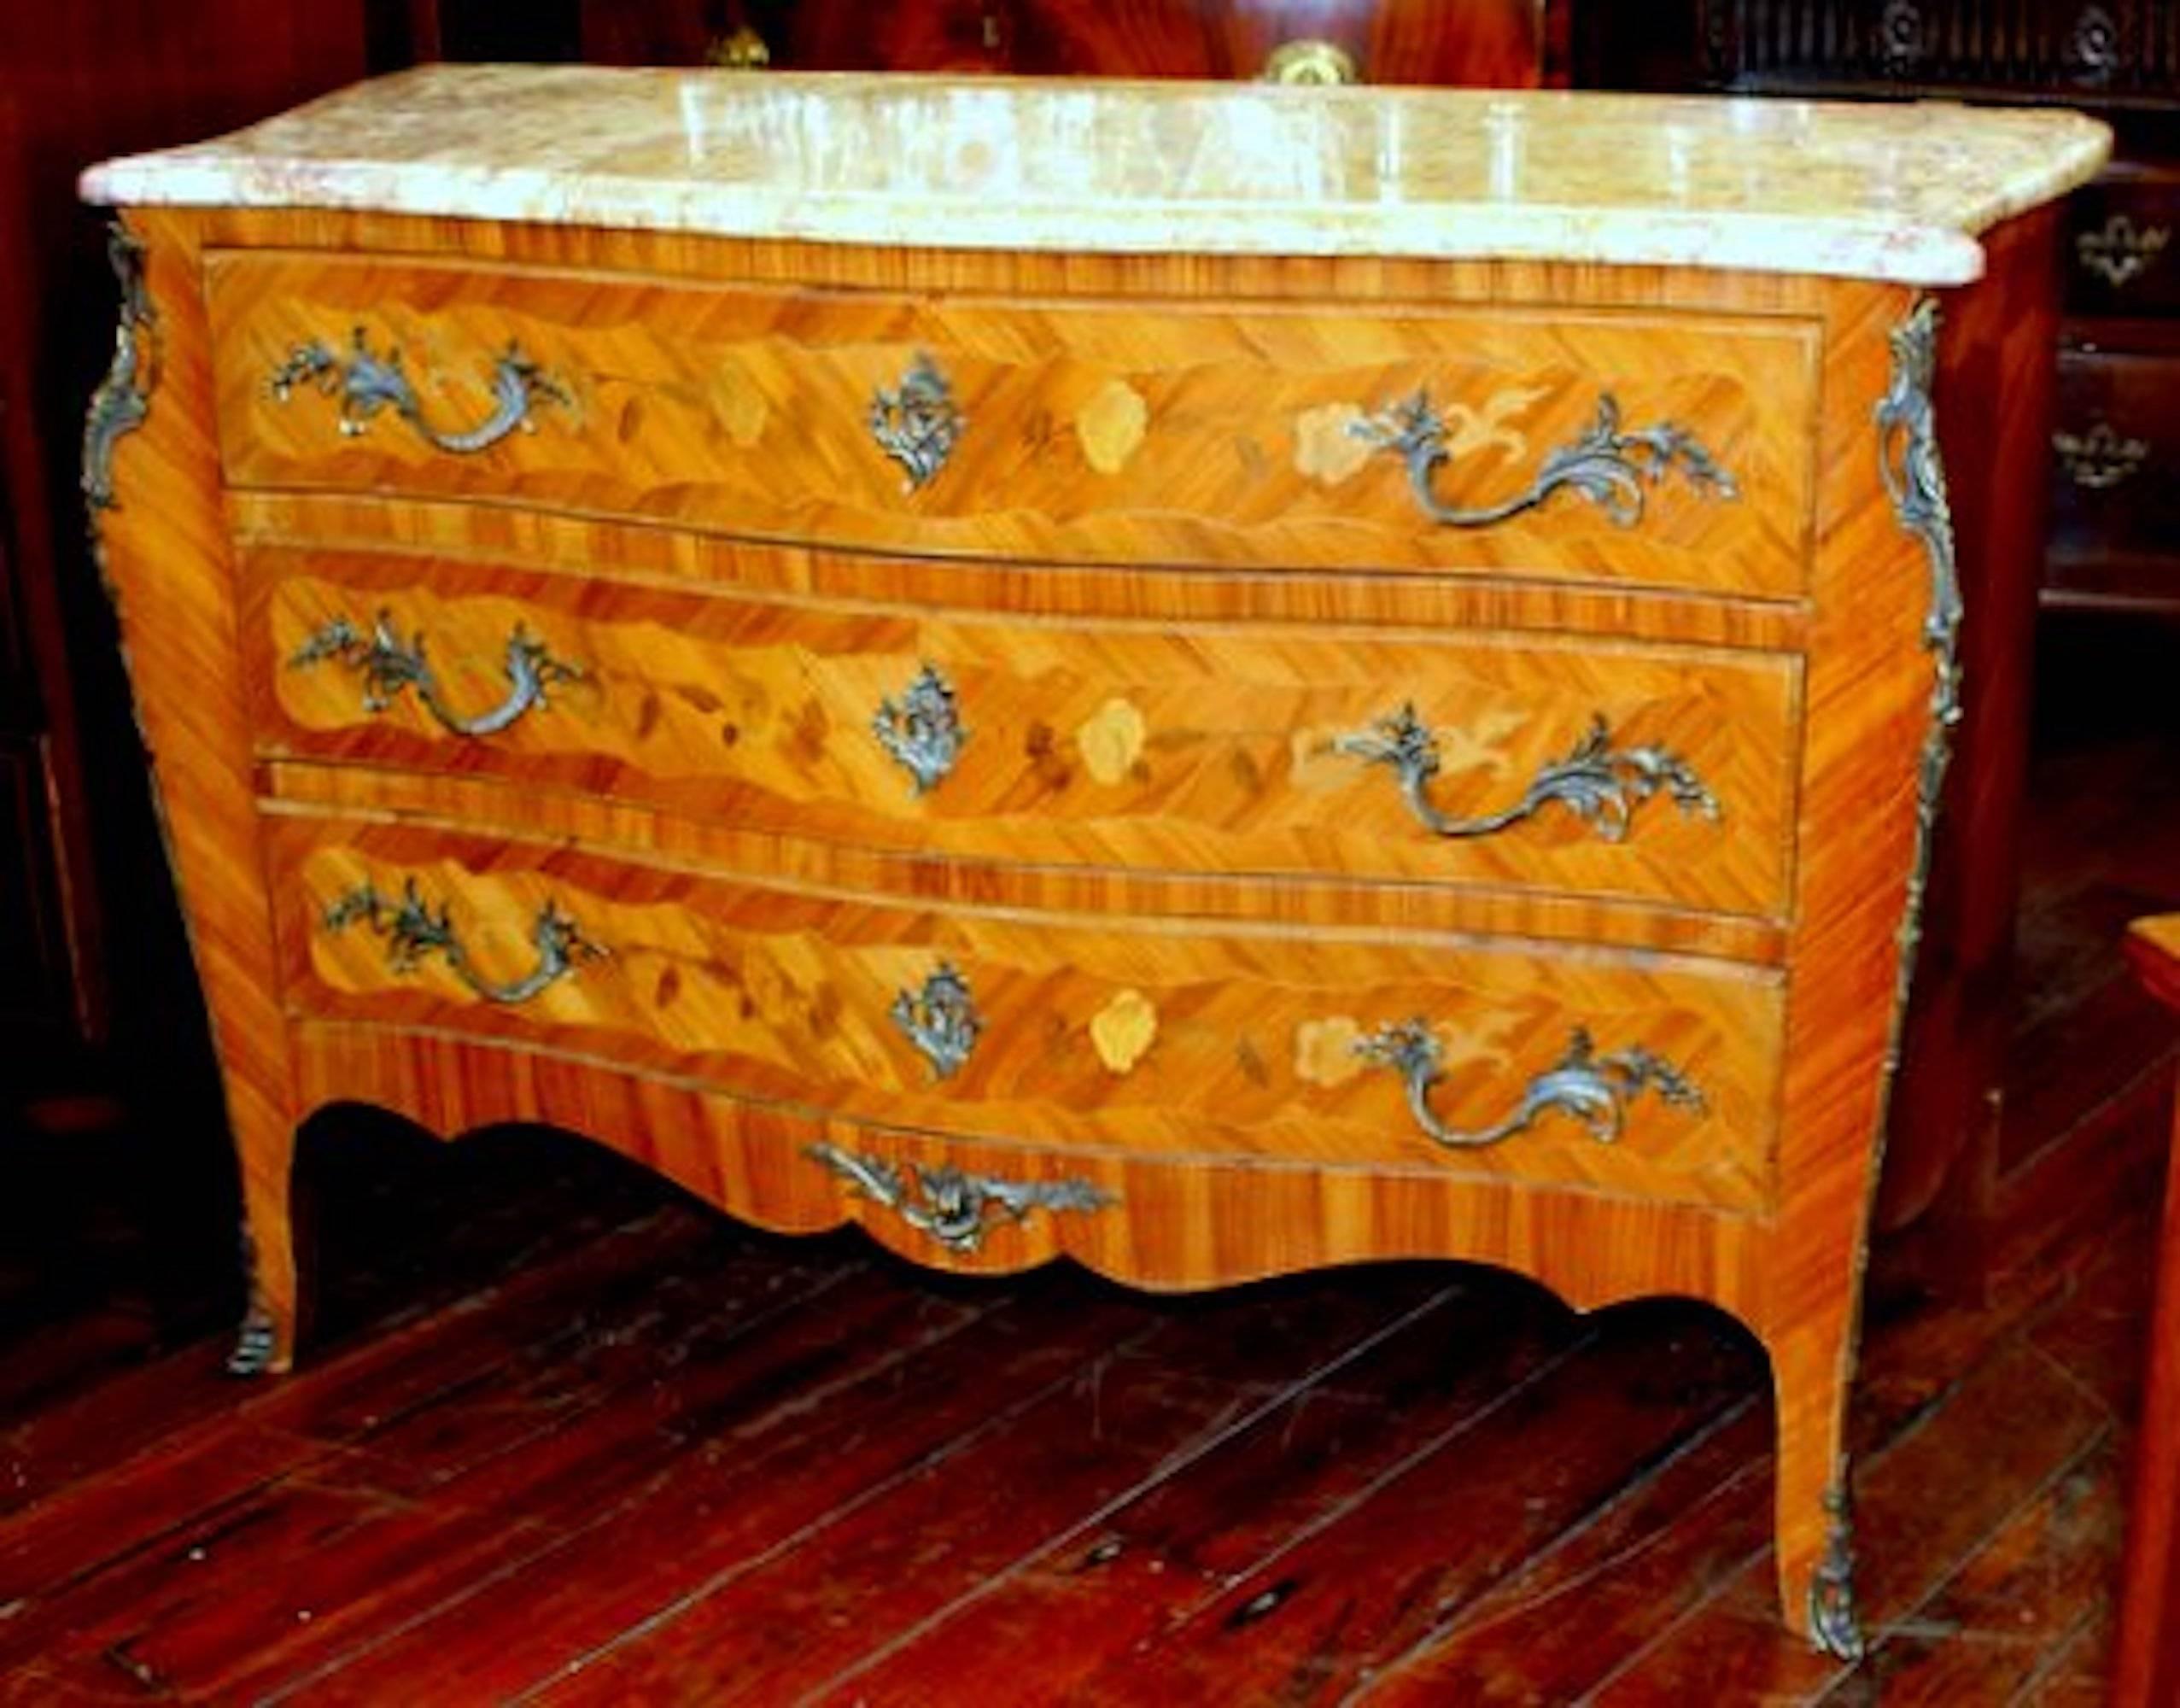 Fabulous quality old French marquetry inlaid Louis XV style inlaid kingwood marble-top commode with ormolu mounts. Please note exceptional inlays throughout. Marble and chest are both in excellent condition, circa 1890-1910.